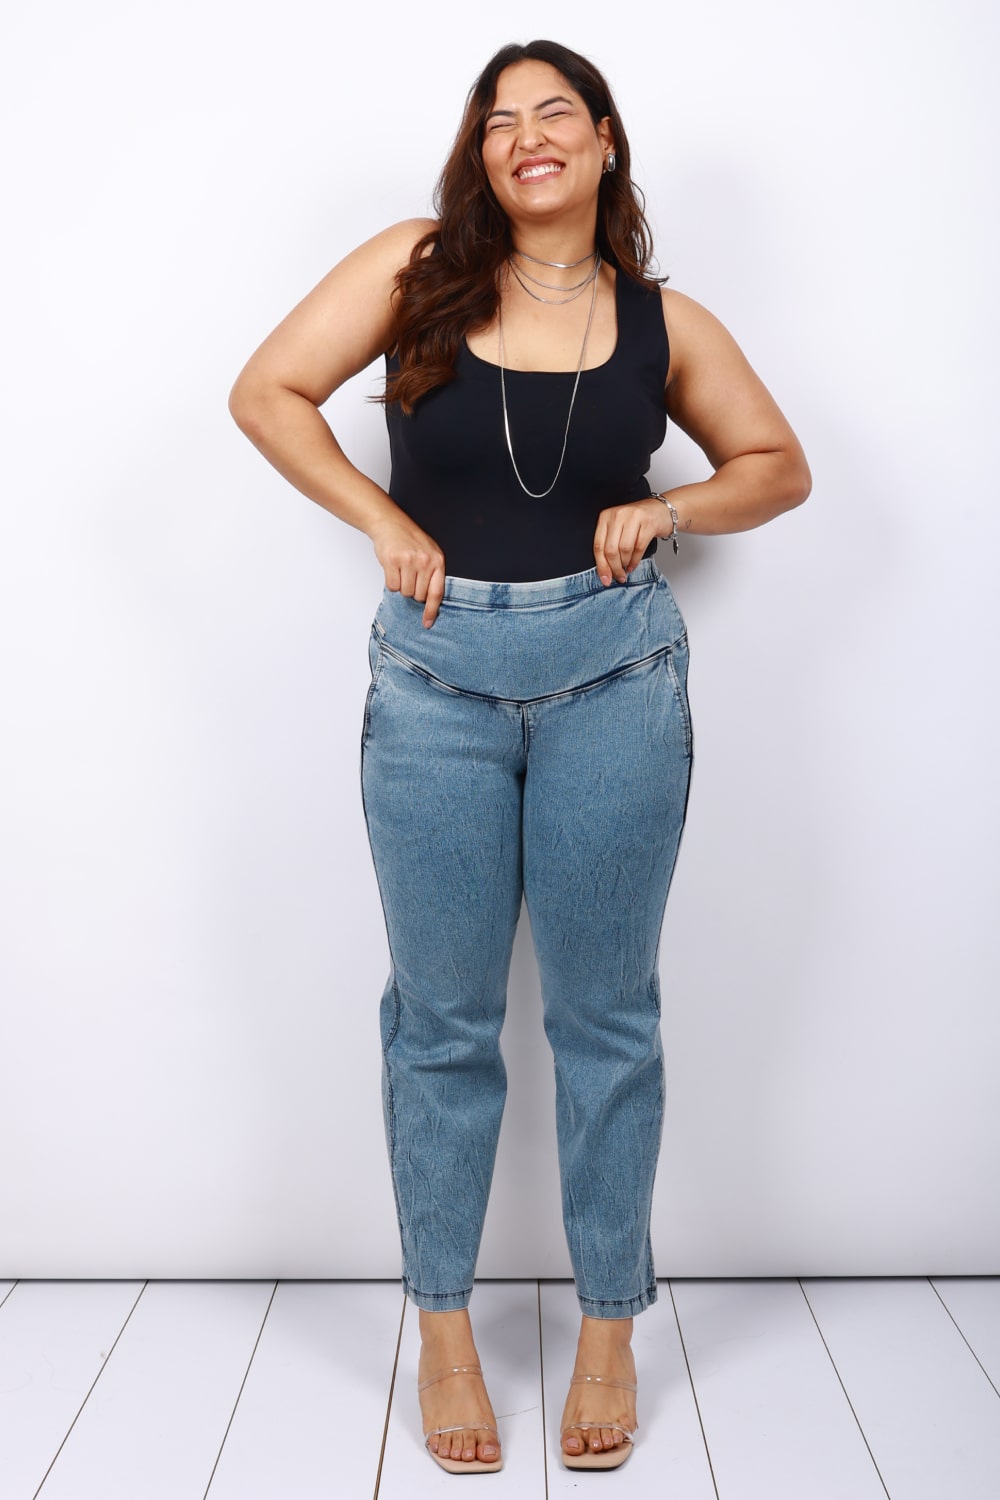 Buy Plus Size Women Denim PalazzoLoose Trouser  HIGH Rise  Denim Blue  Color  Non Stretch Fabric  Back Elastic to fit Waist Size 28 inches to  34 inches Max at Amazonin